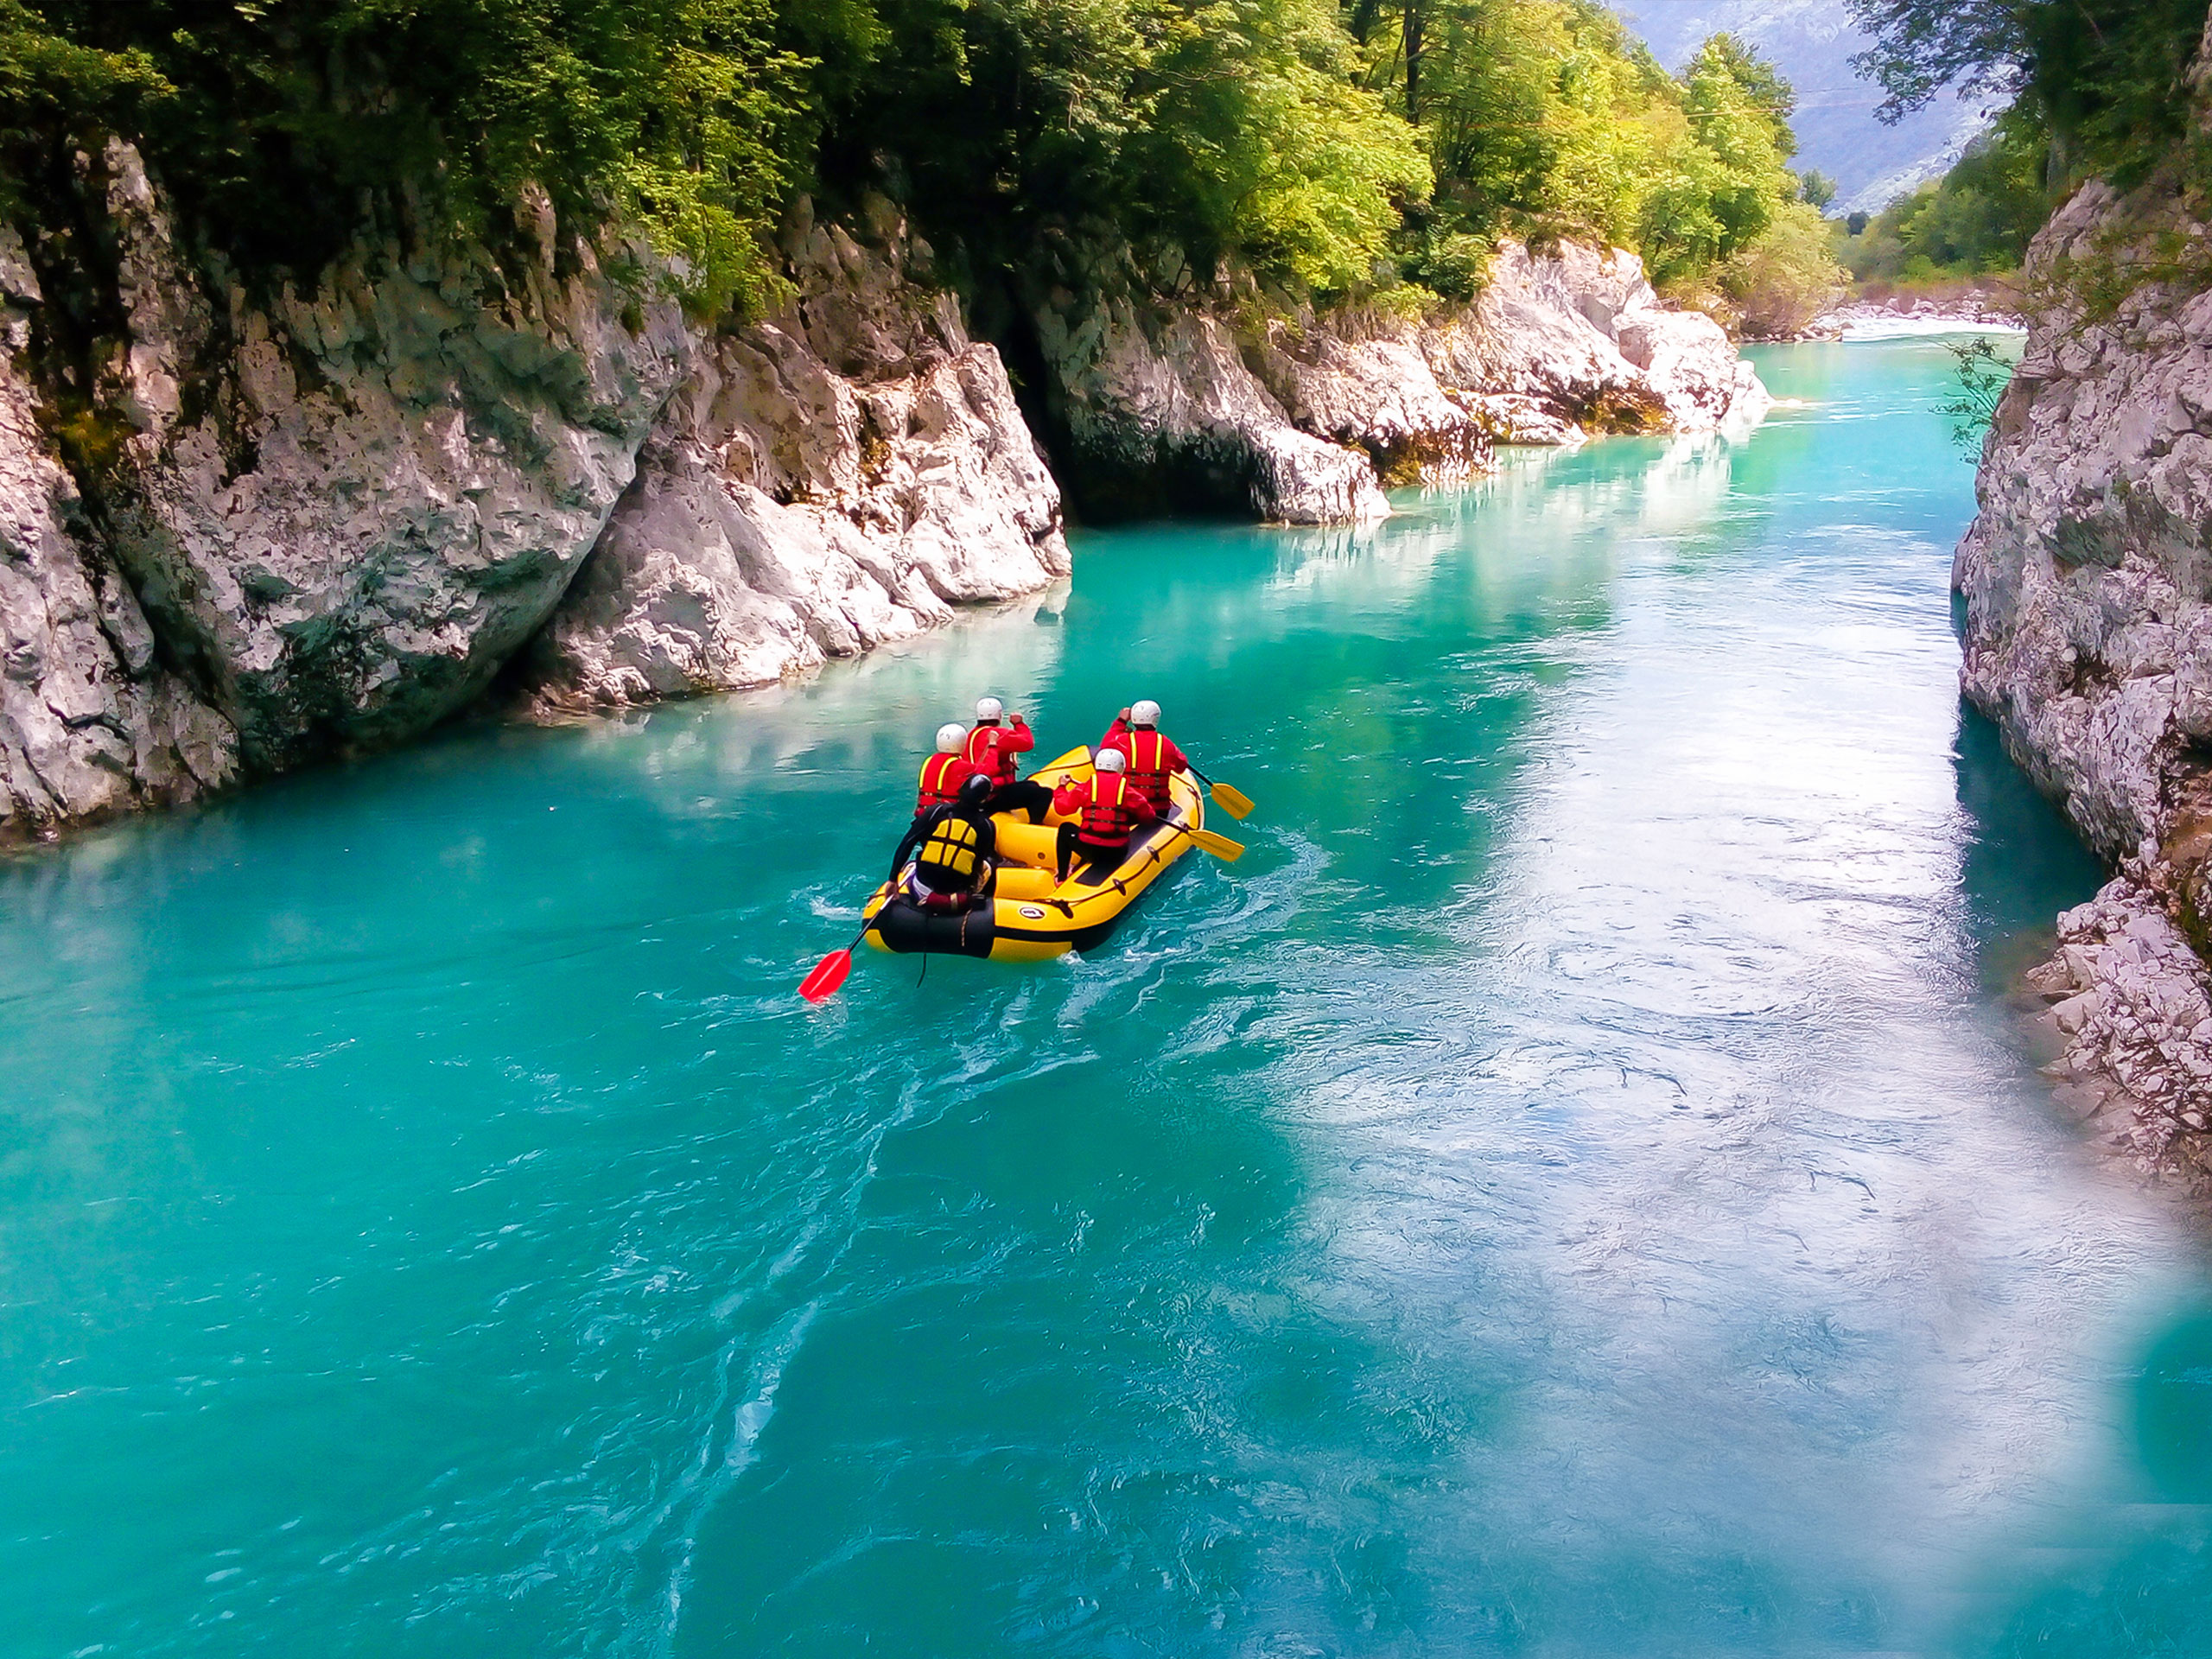 Rafting on the Soca River